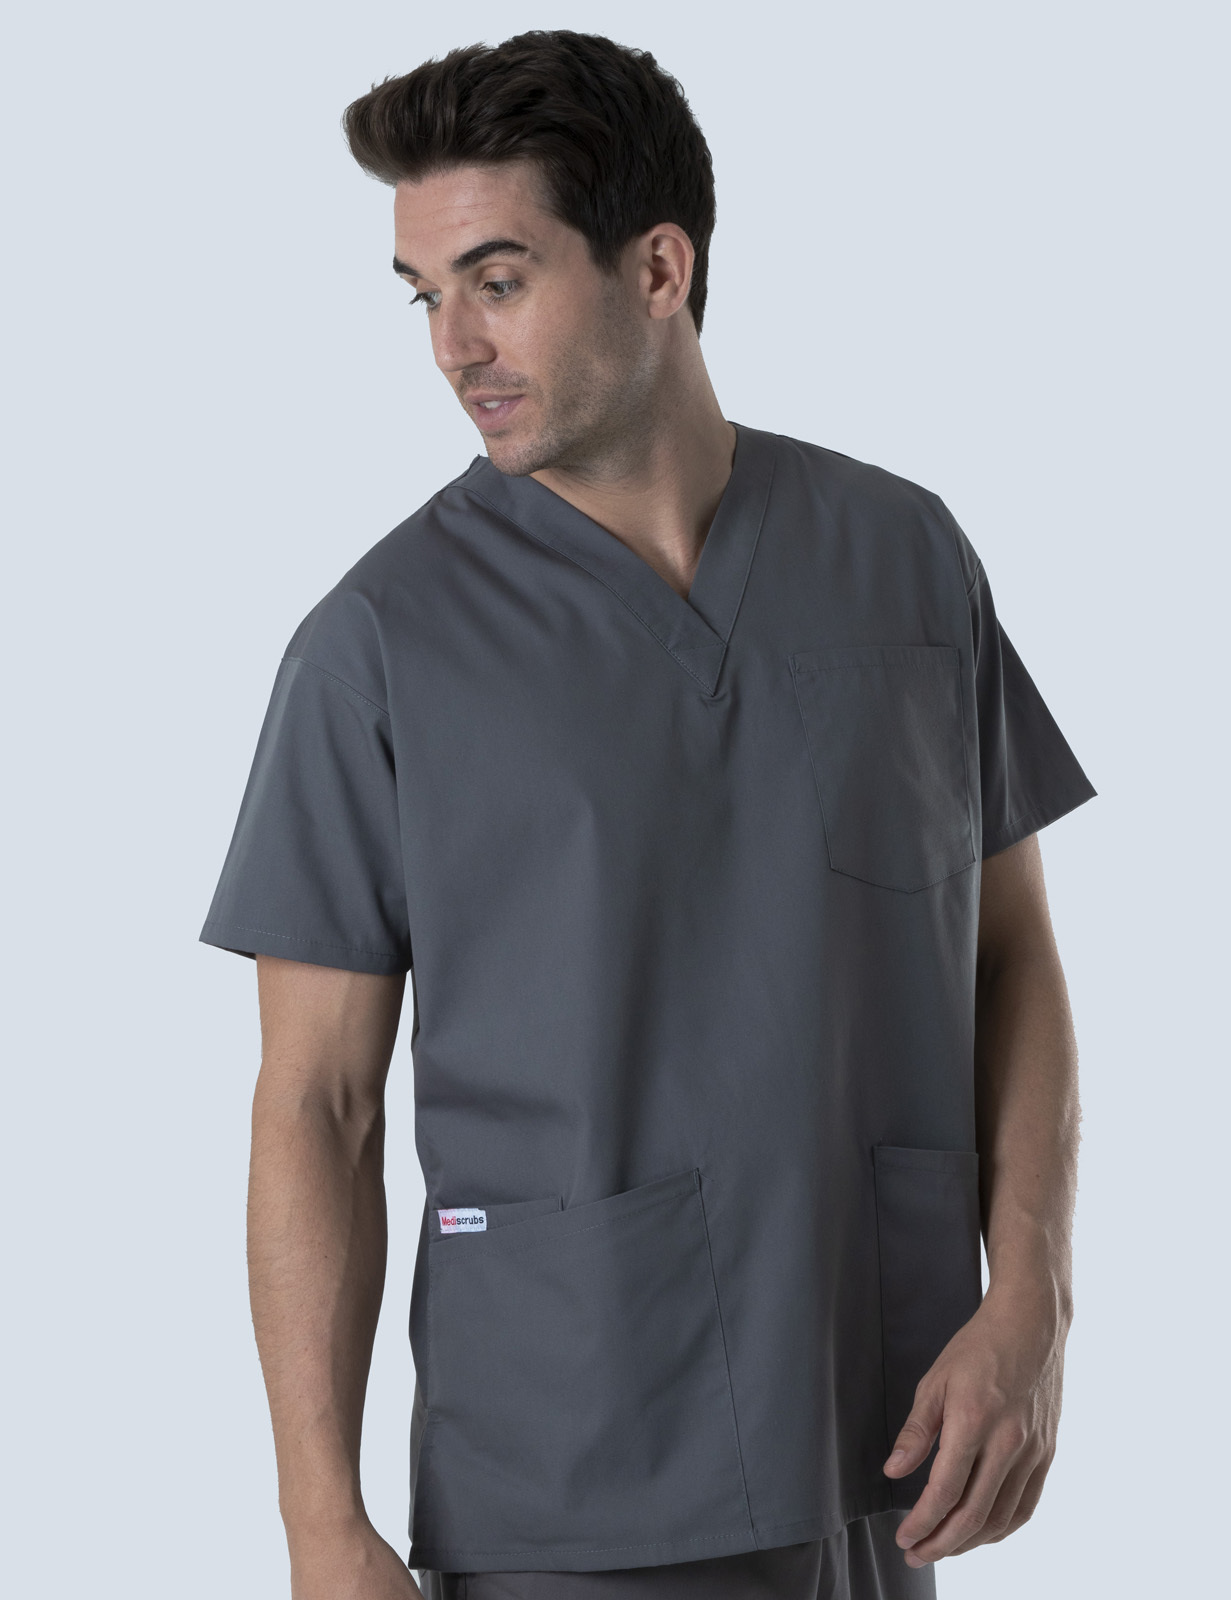 Western Private Hospital Surgical Ward Uniform Set Bundle ( 4 Pocket Top and Cargo Pants in Steel Grey incl Logo)